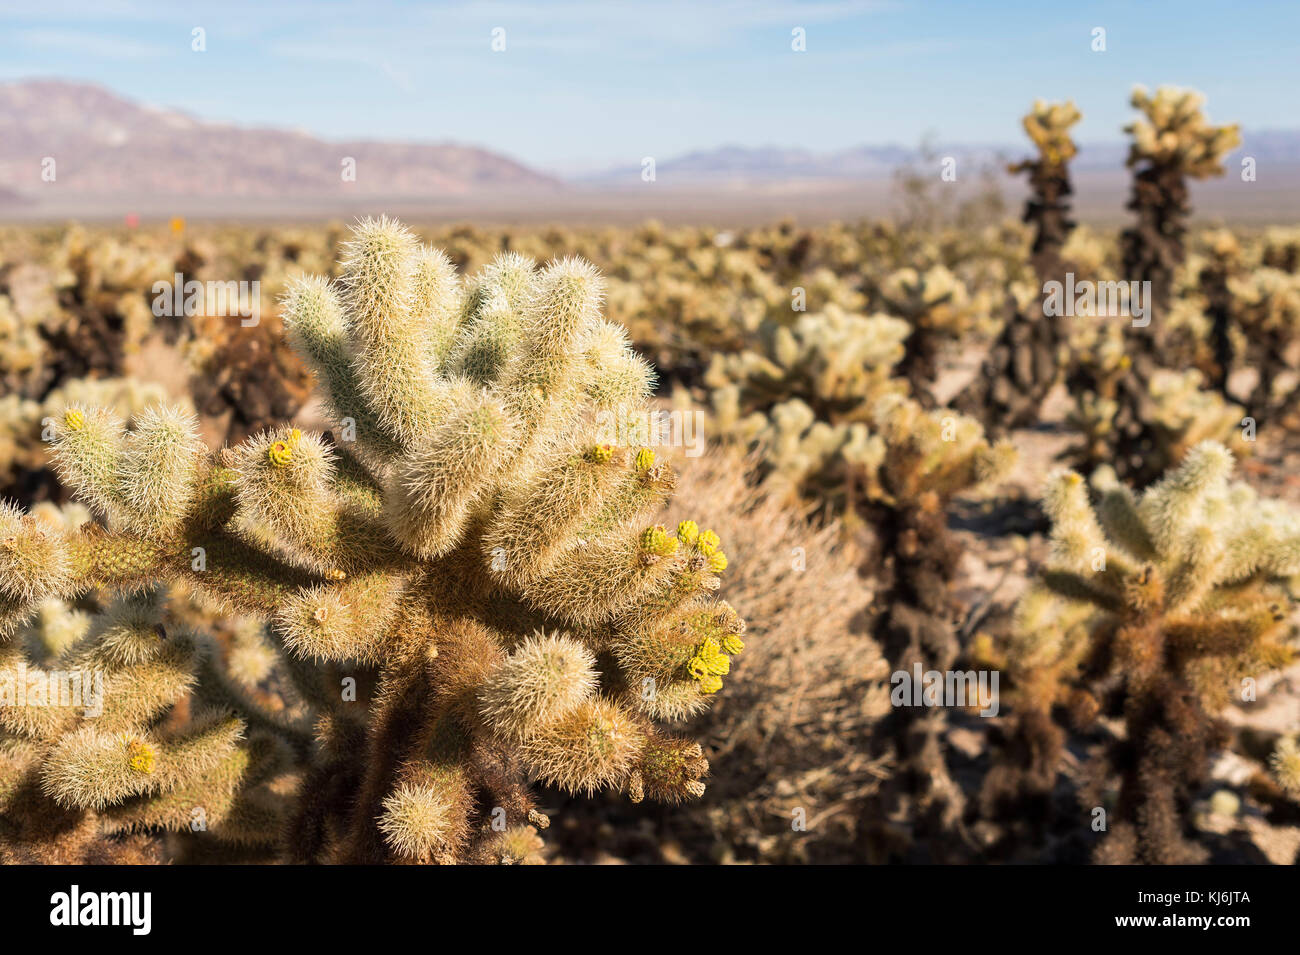 Landscape of the Joshua Tree National Park in California, Western USA: Cactus<br><br> Stock Photo